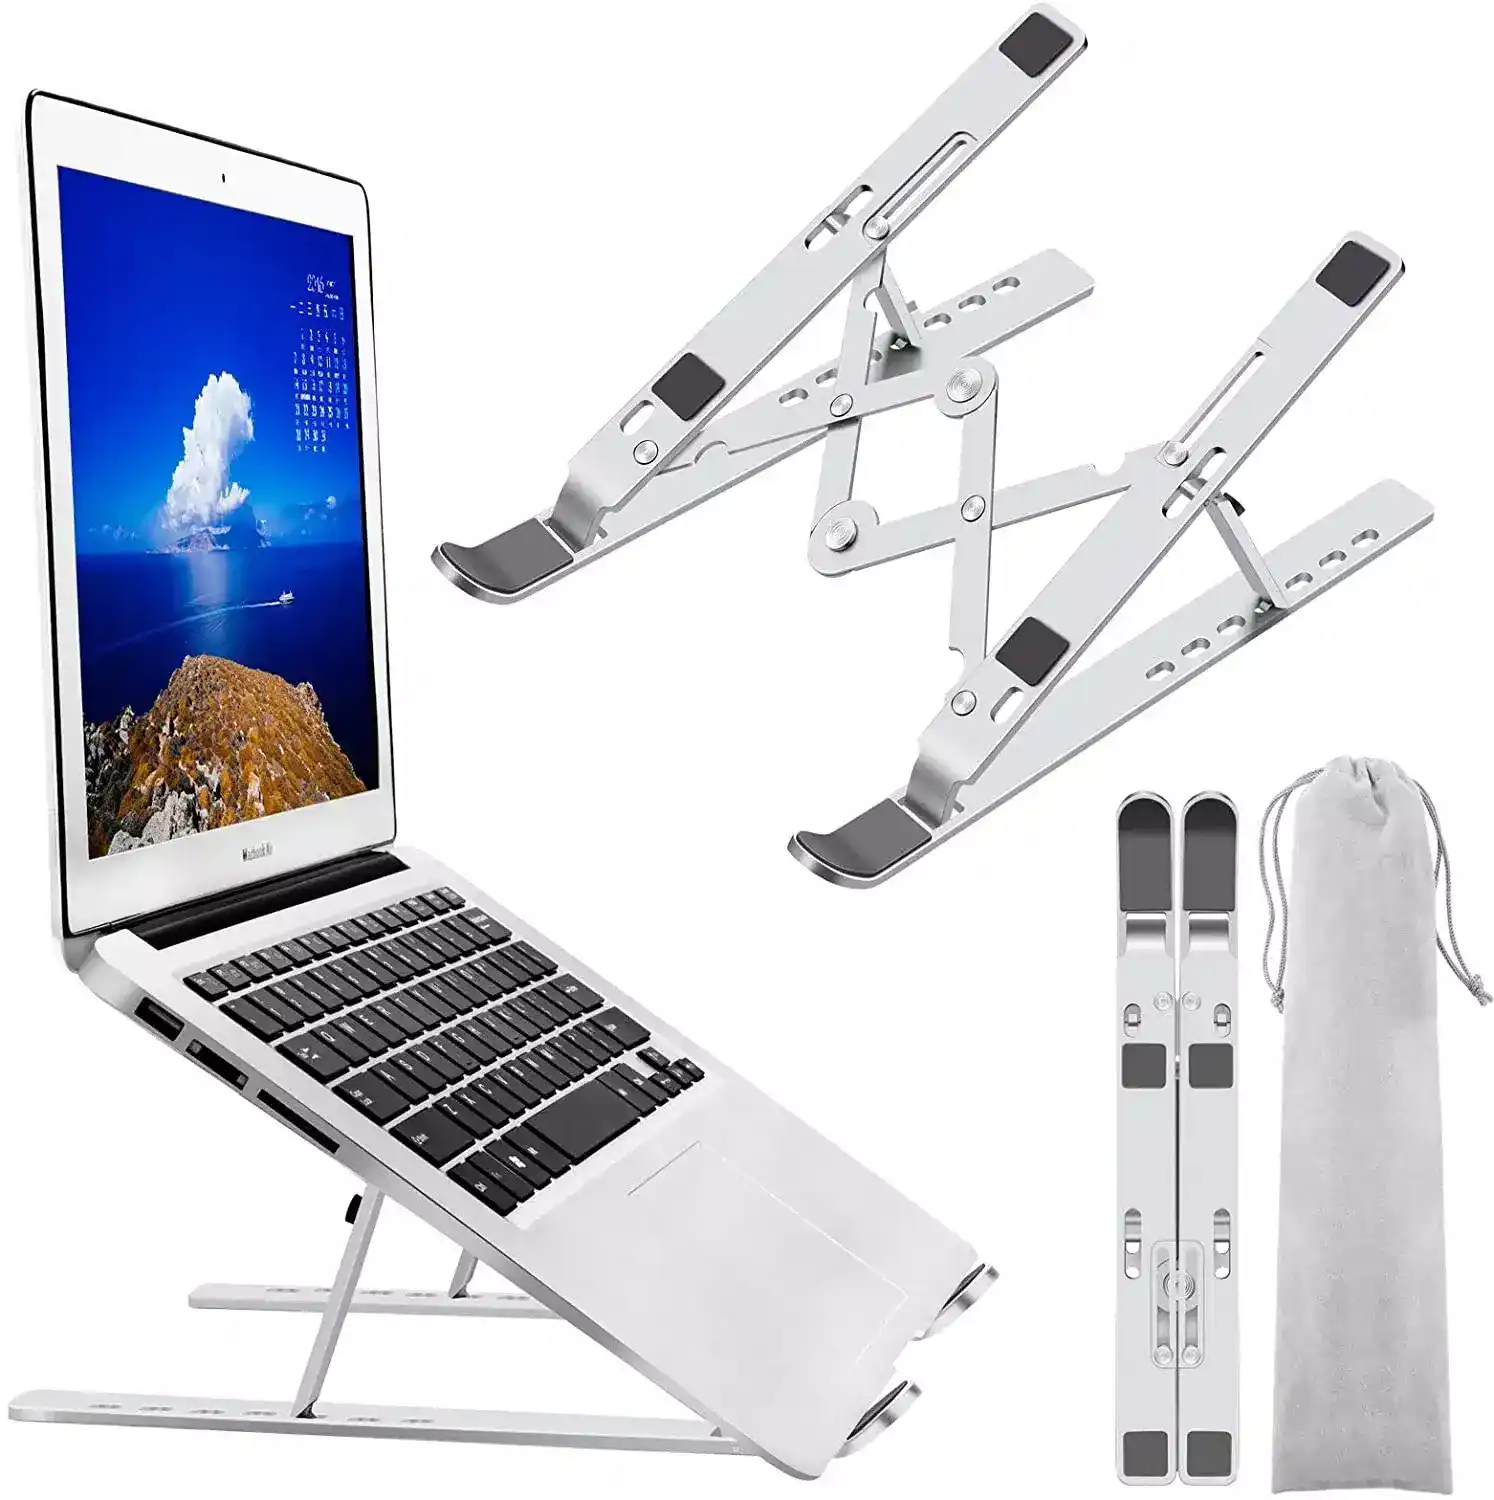 Buy Laptop Stand at best price in Pakistan | Rhizmall.pk